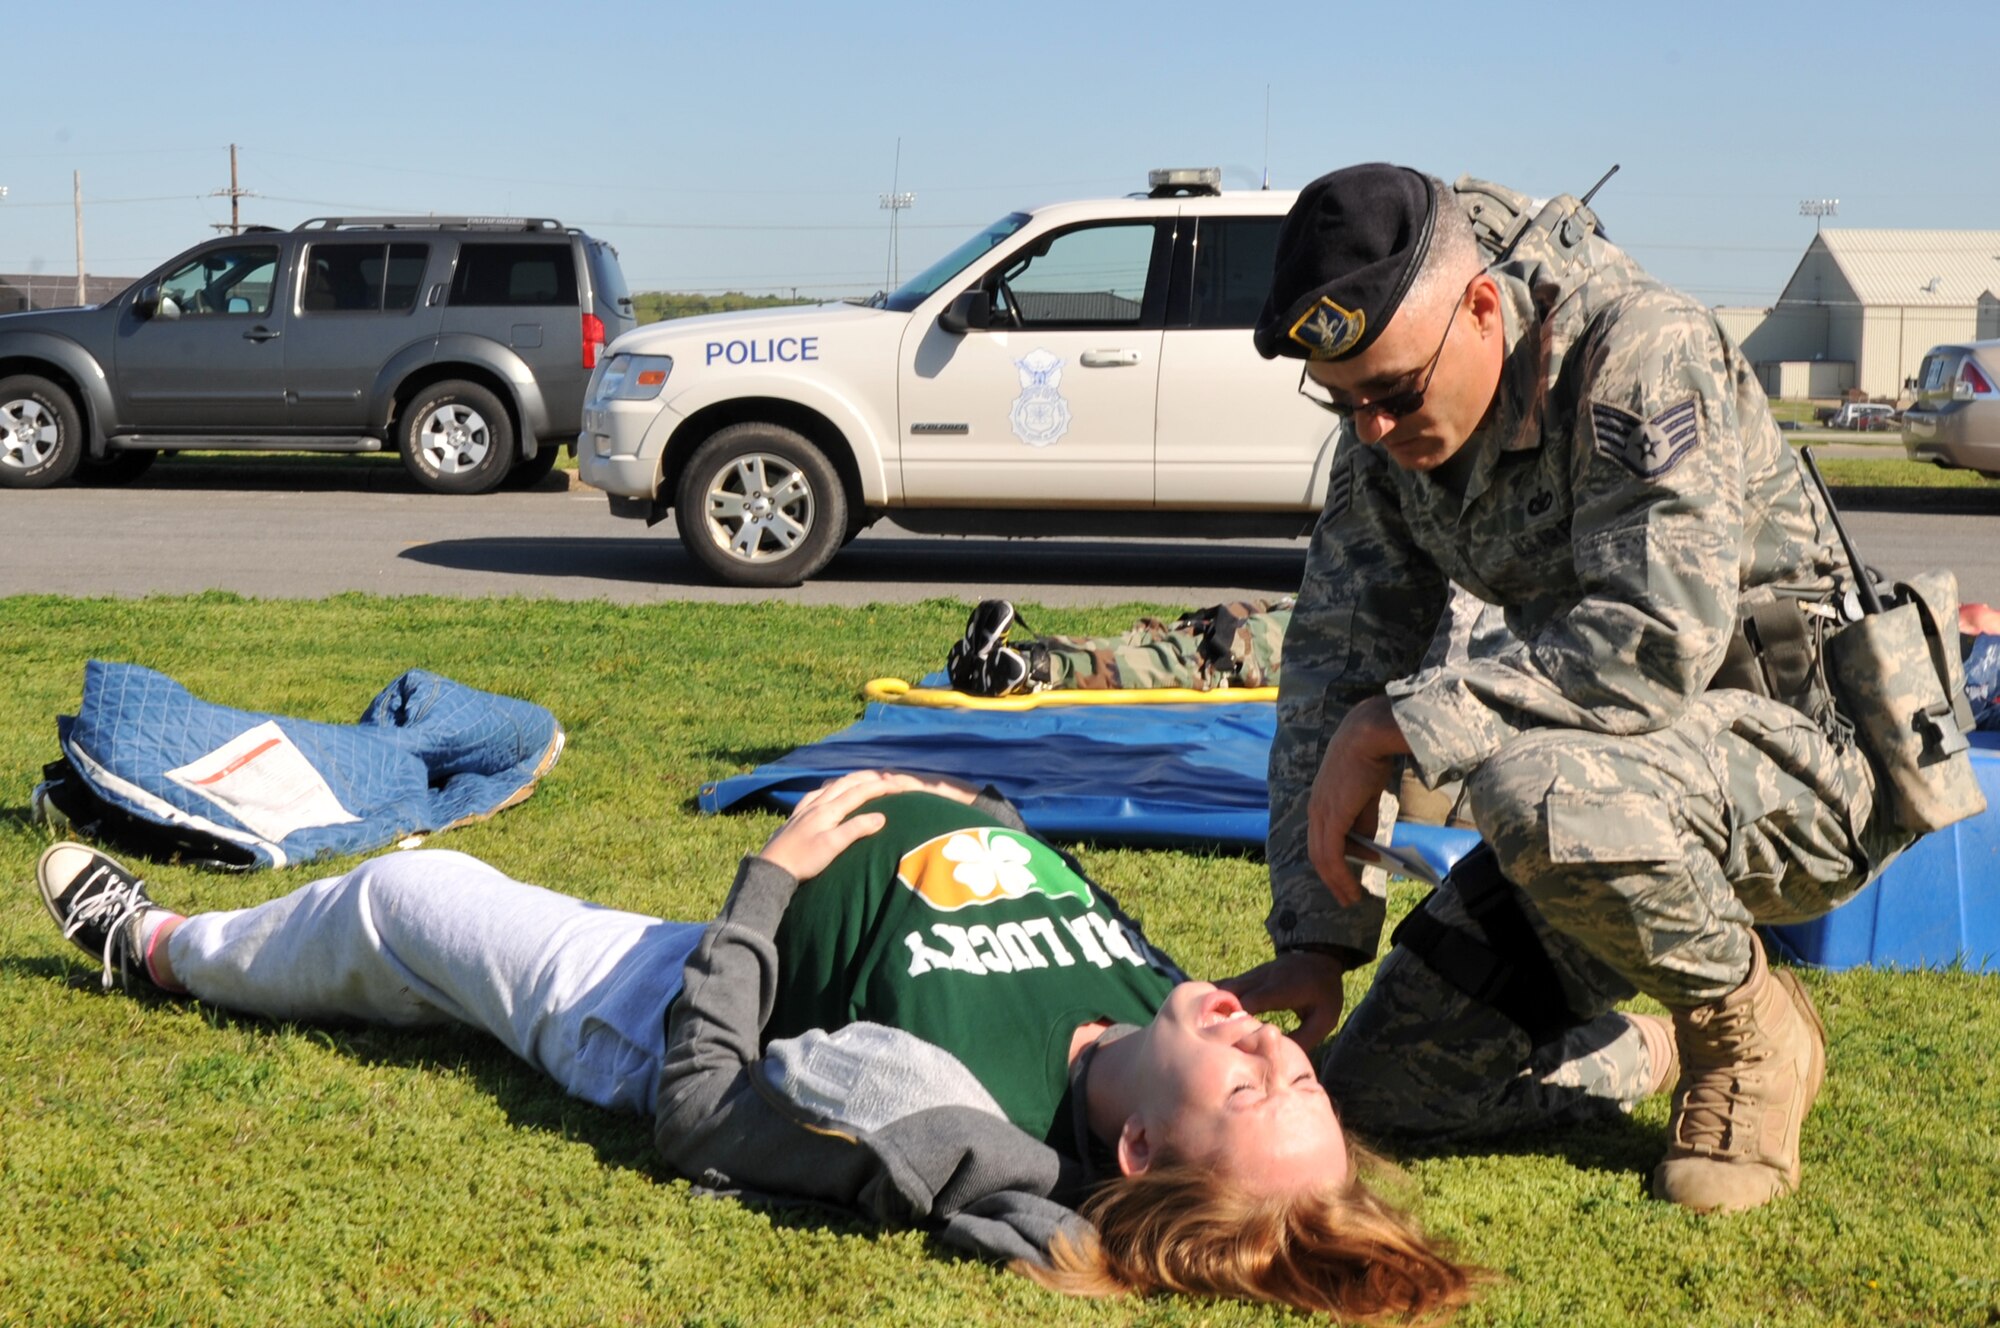 Staff Sgt. Jack Way, a 19th Security Forces Squadron patrolman, monitors a local area student’s vital signs during a major accident response exercise April 12, 2011, at Little Rock Air Force Base, Ark. The MARE enabled Airmen to practice procedures for the upcoming operation readiness inspection in October. (U.S. Air Force photo by Airman 1st Class Rusty Frank)